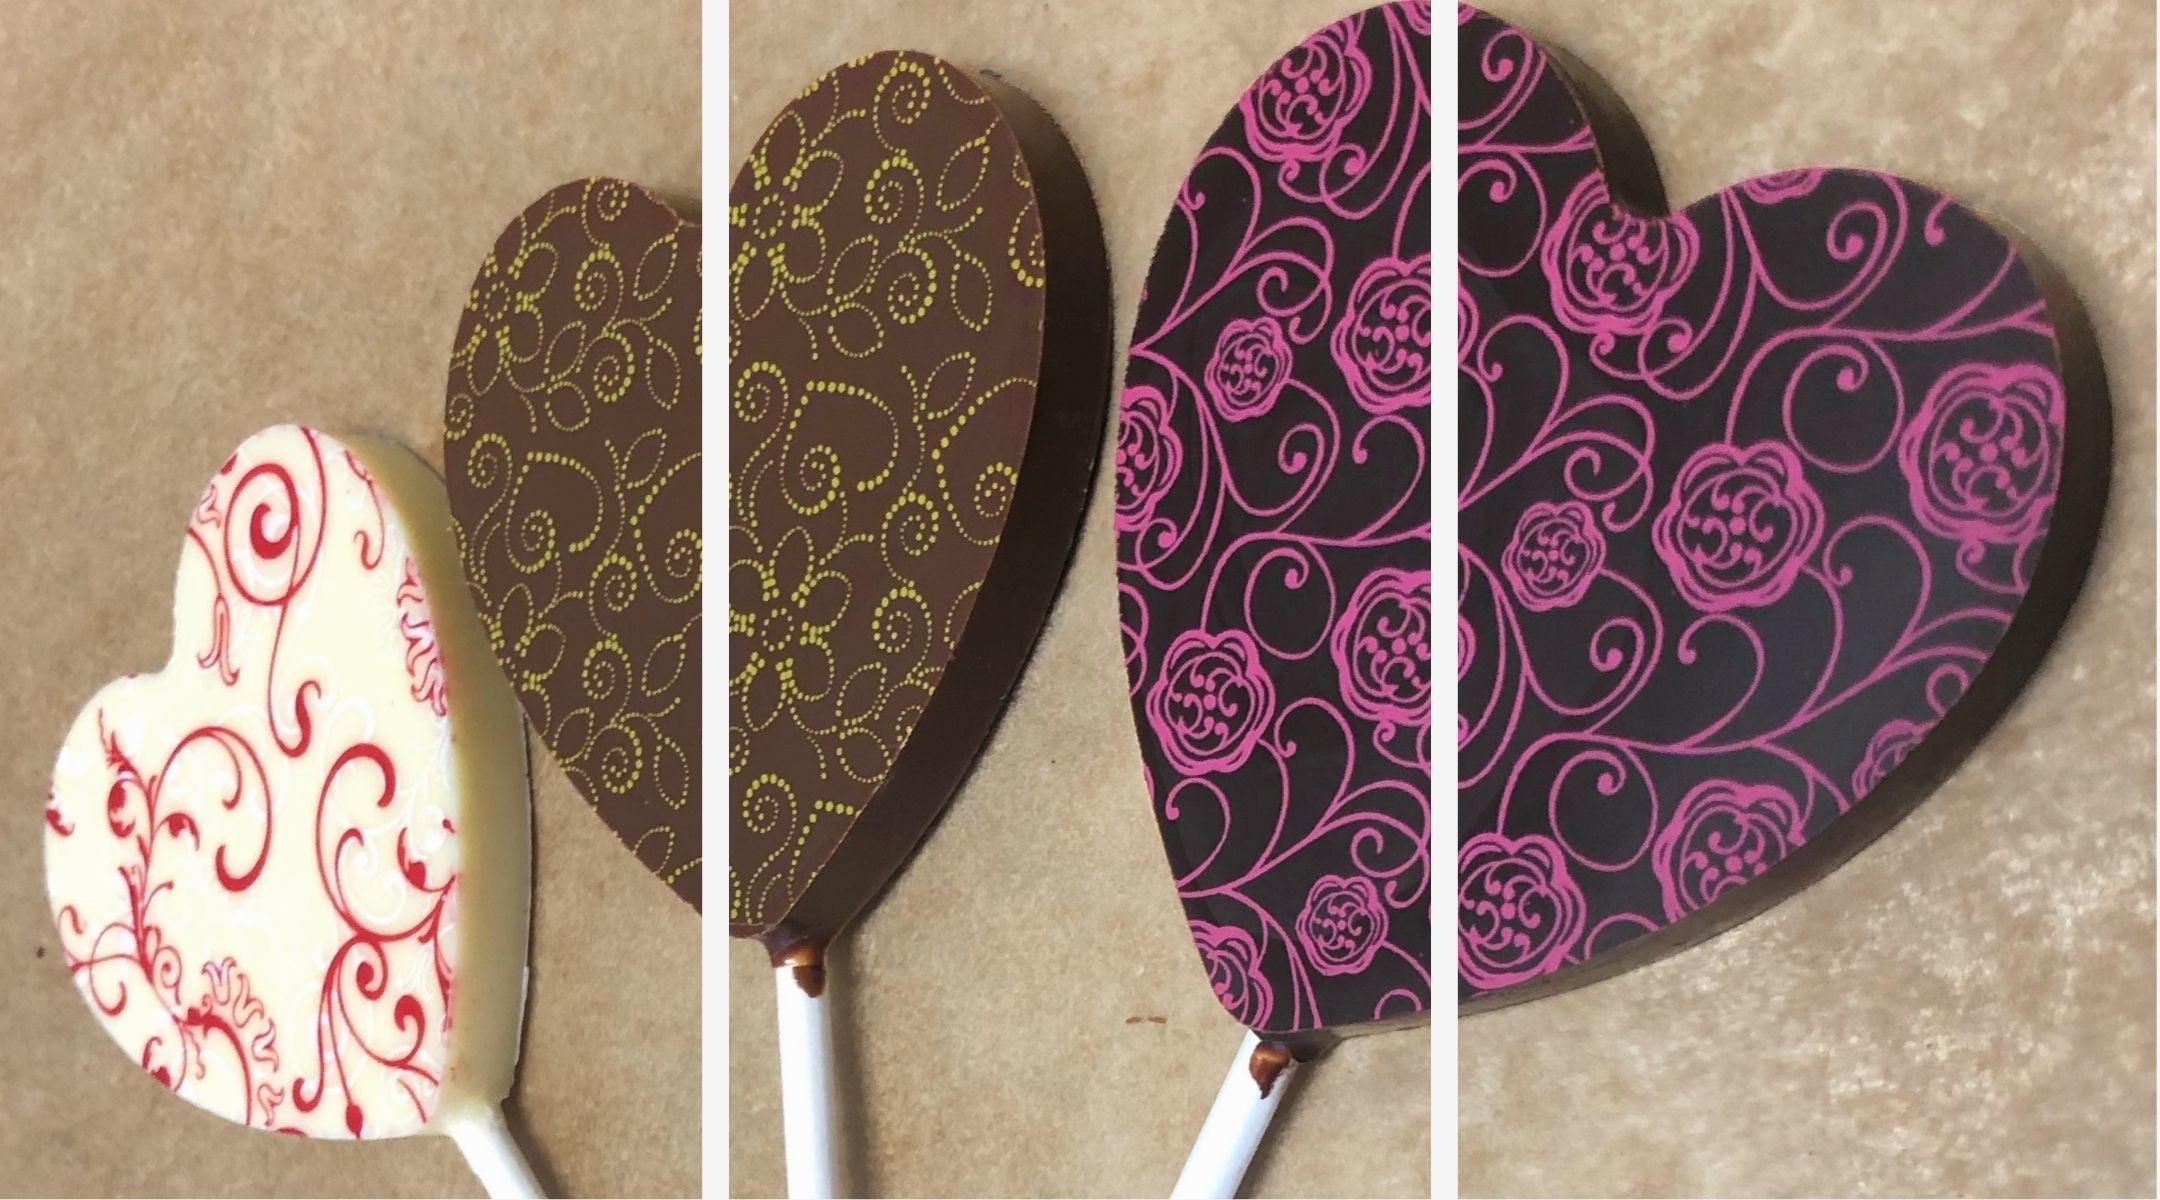 Three heart shapes lollipops with floral designs in white, milk, and dark chocolate